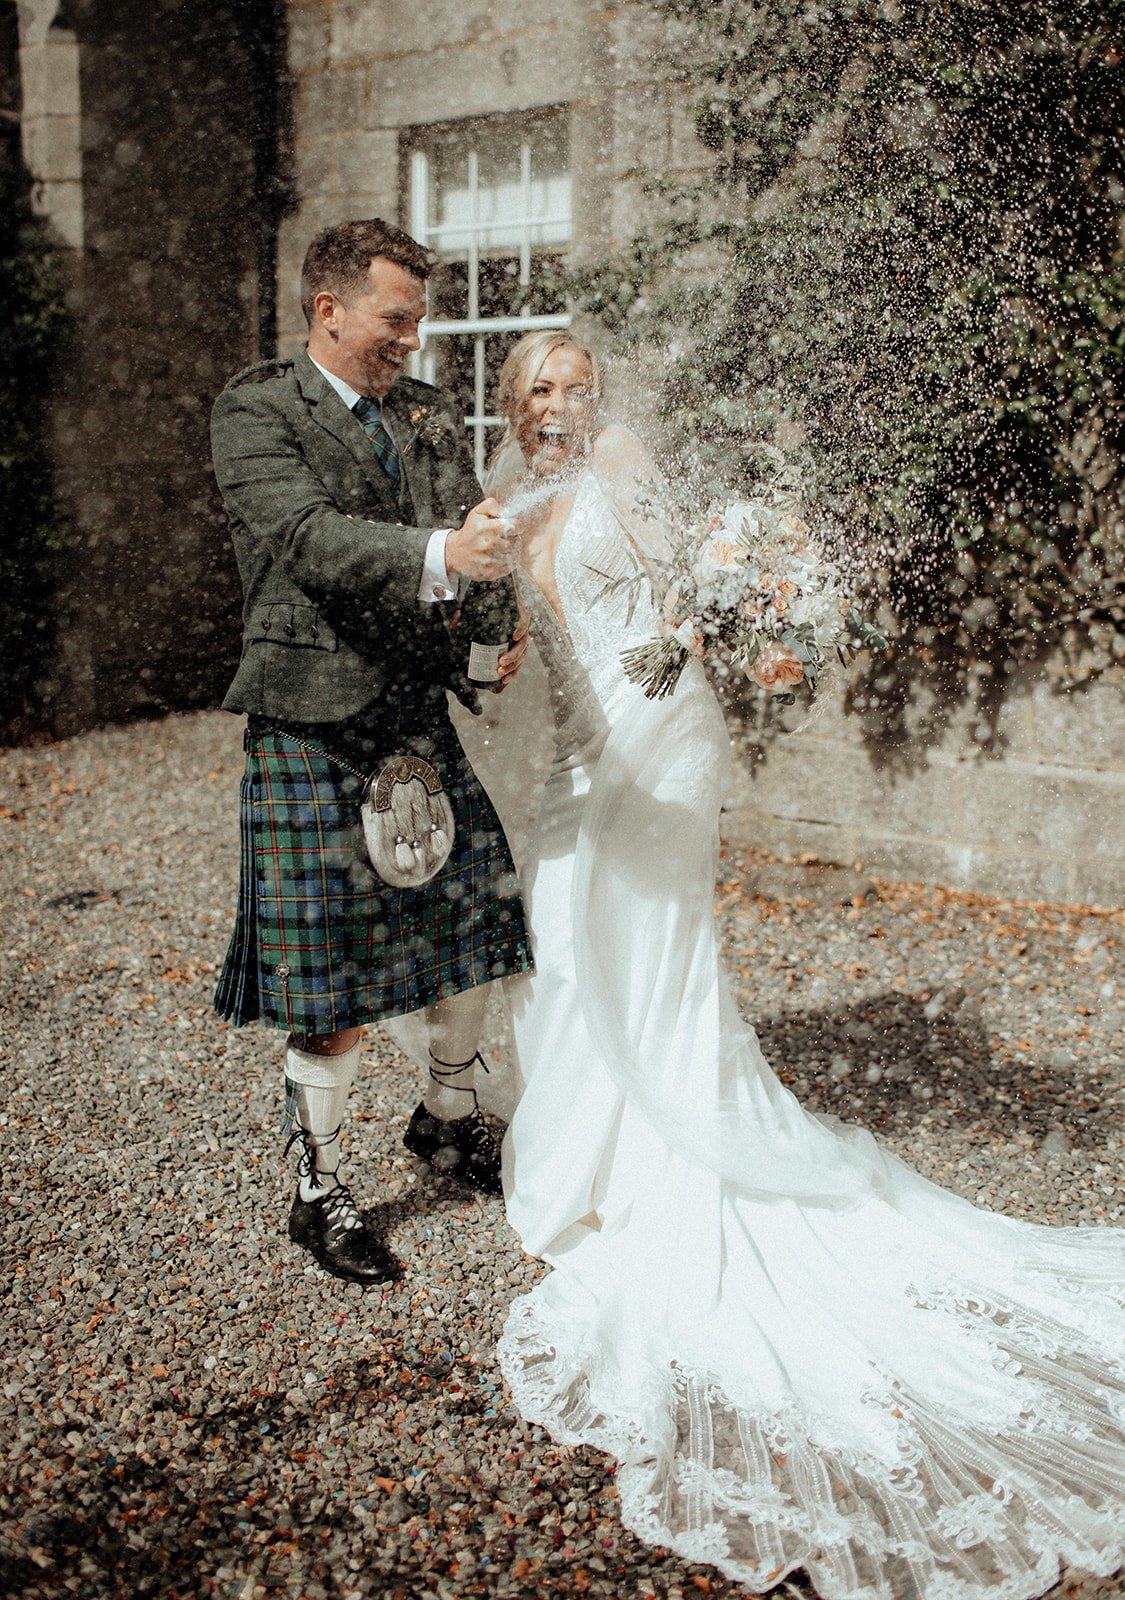 A Beautiful Sottero & Midgley Gown for a Laid Back Scottish Wedding